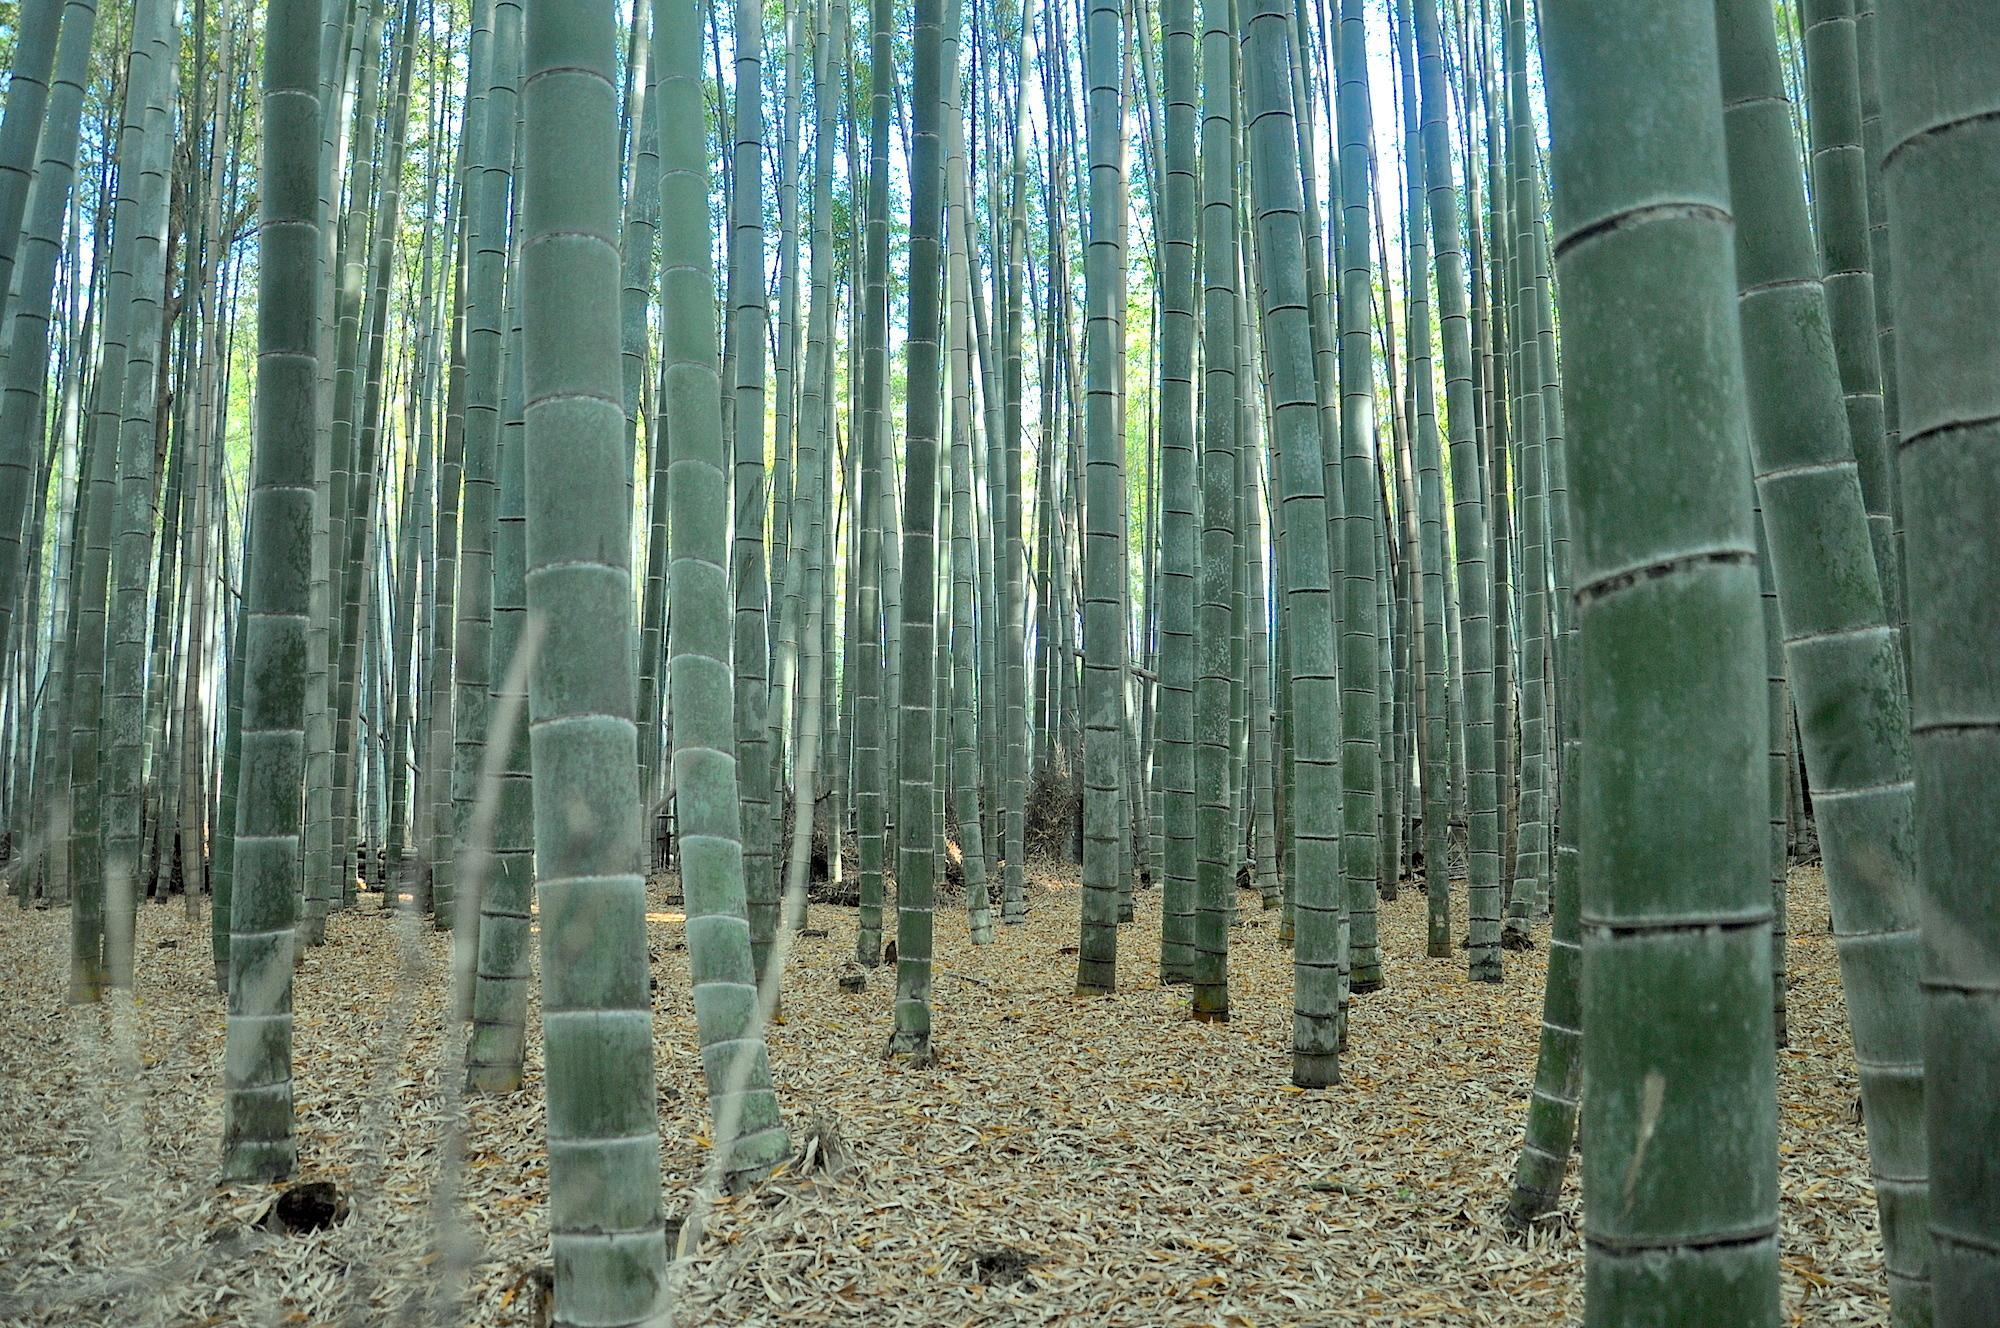 Sagano Bamboo Forest in Kyoto: One of world's prettiest